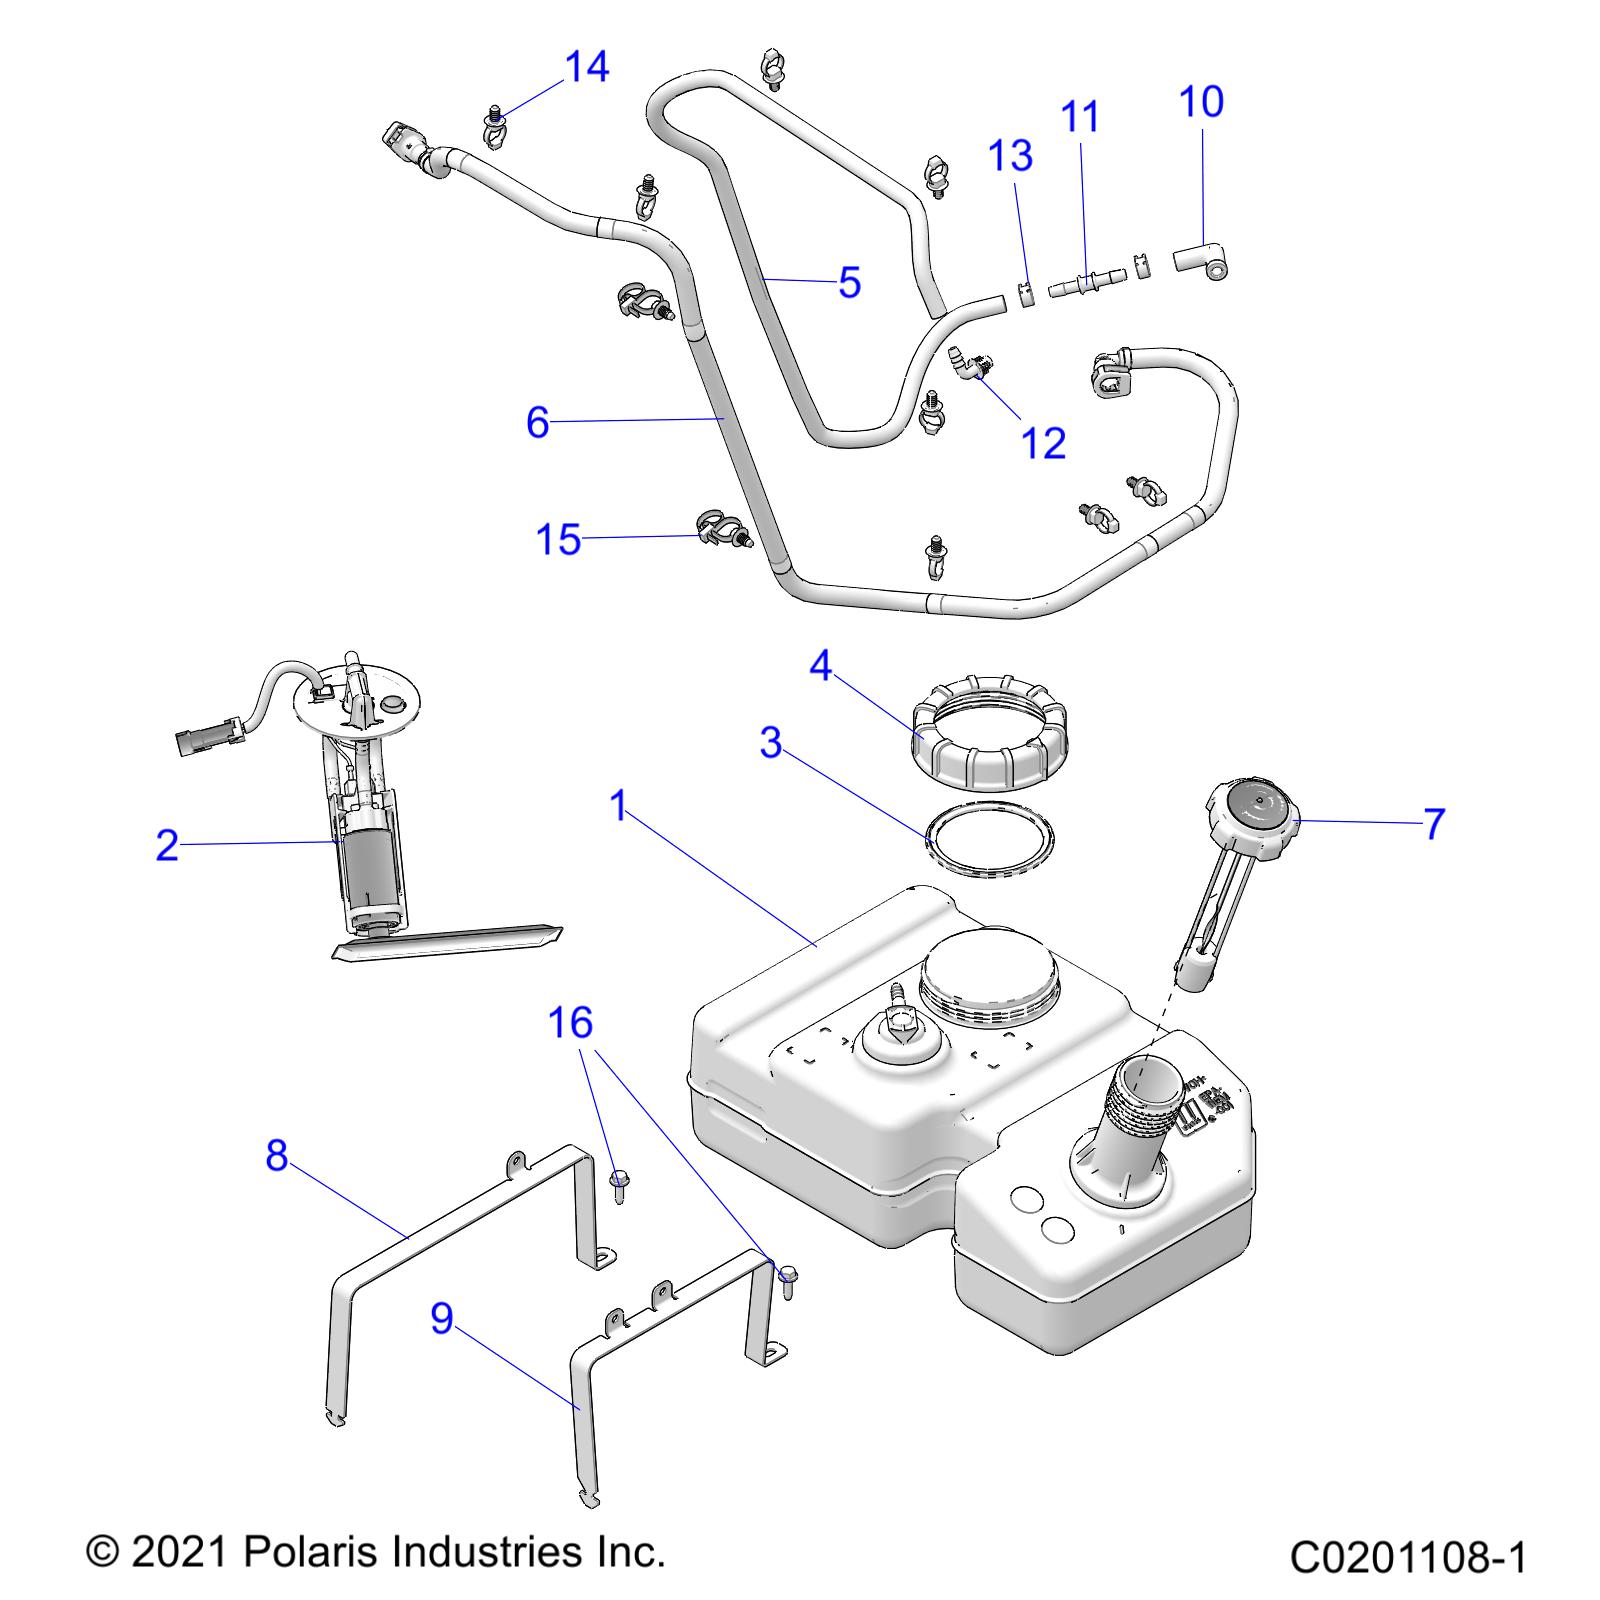 Part Number : 5416441 FITTING-MALE-MALE VENT MZ